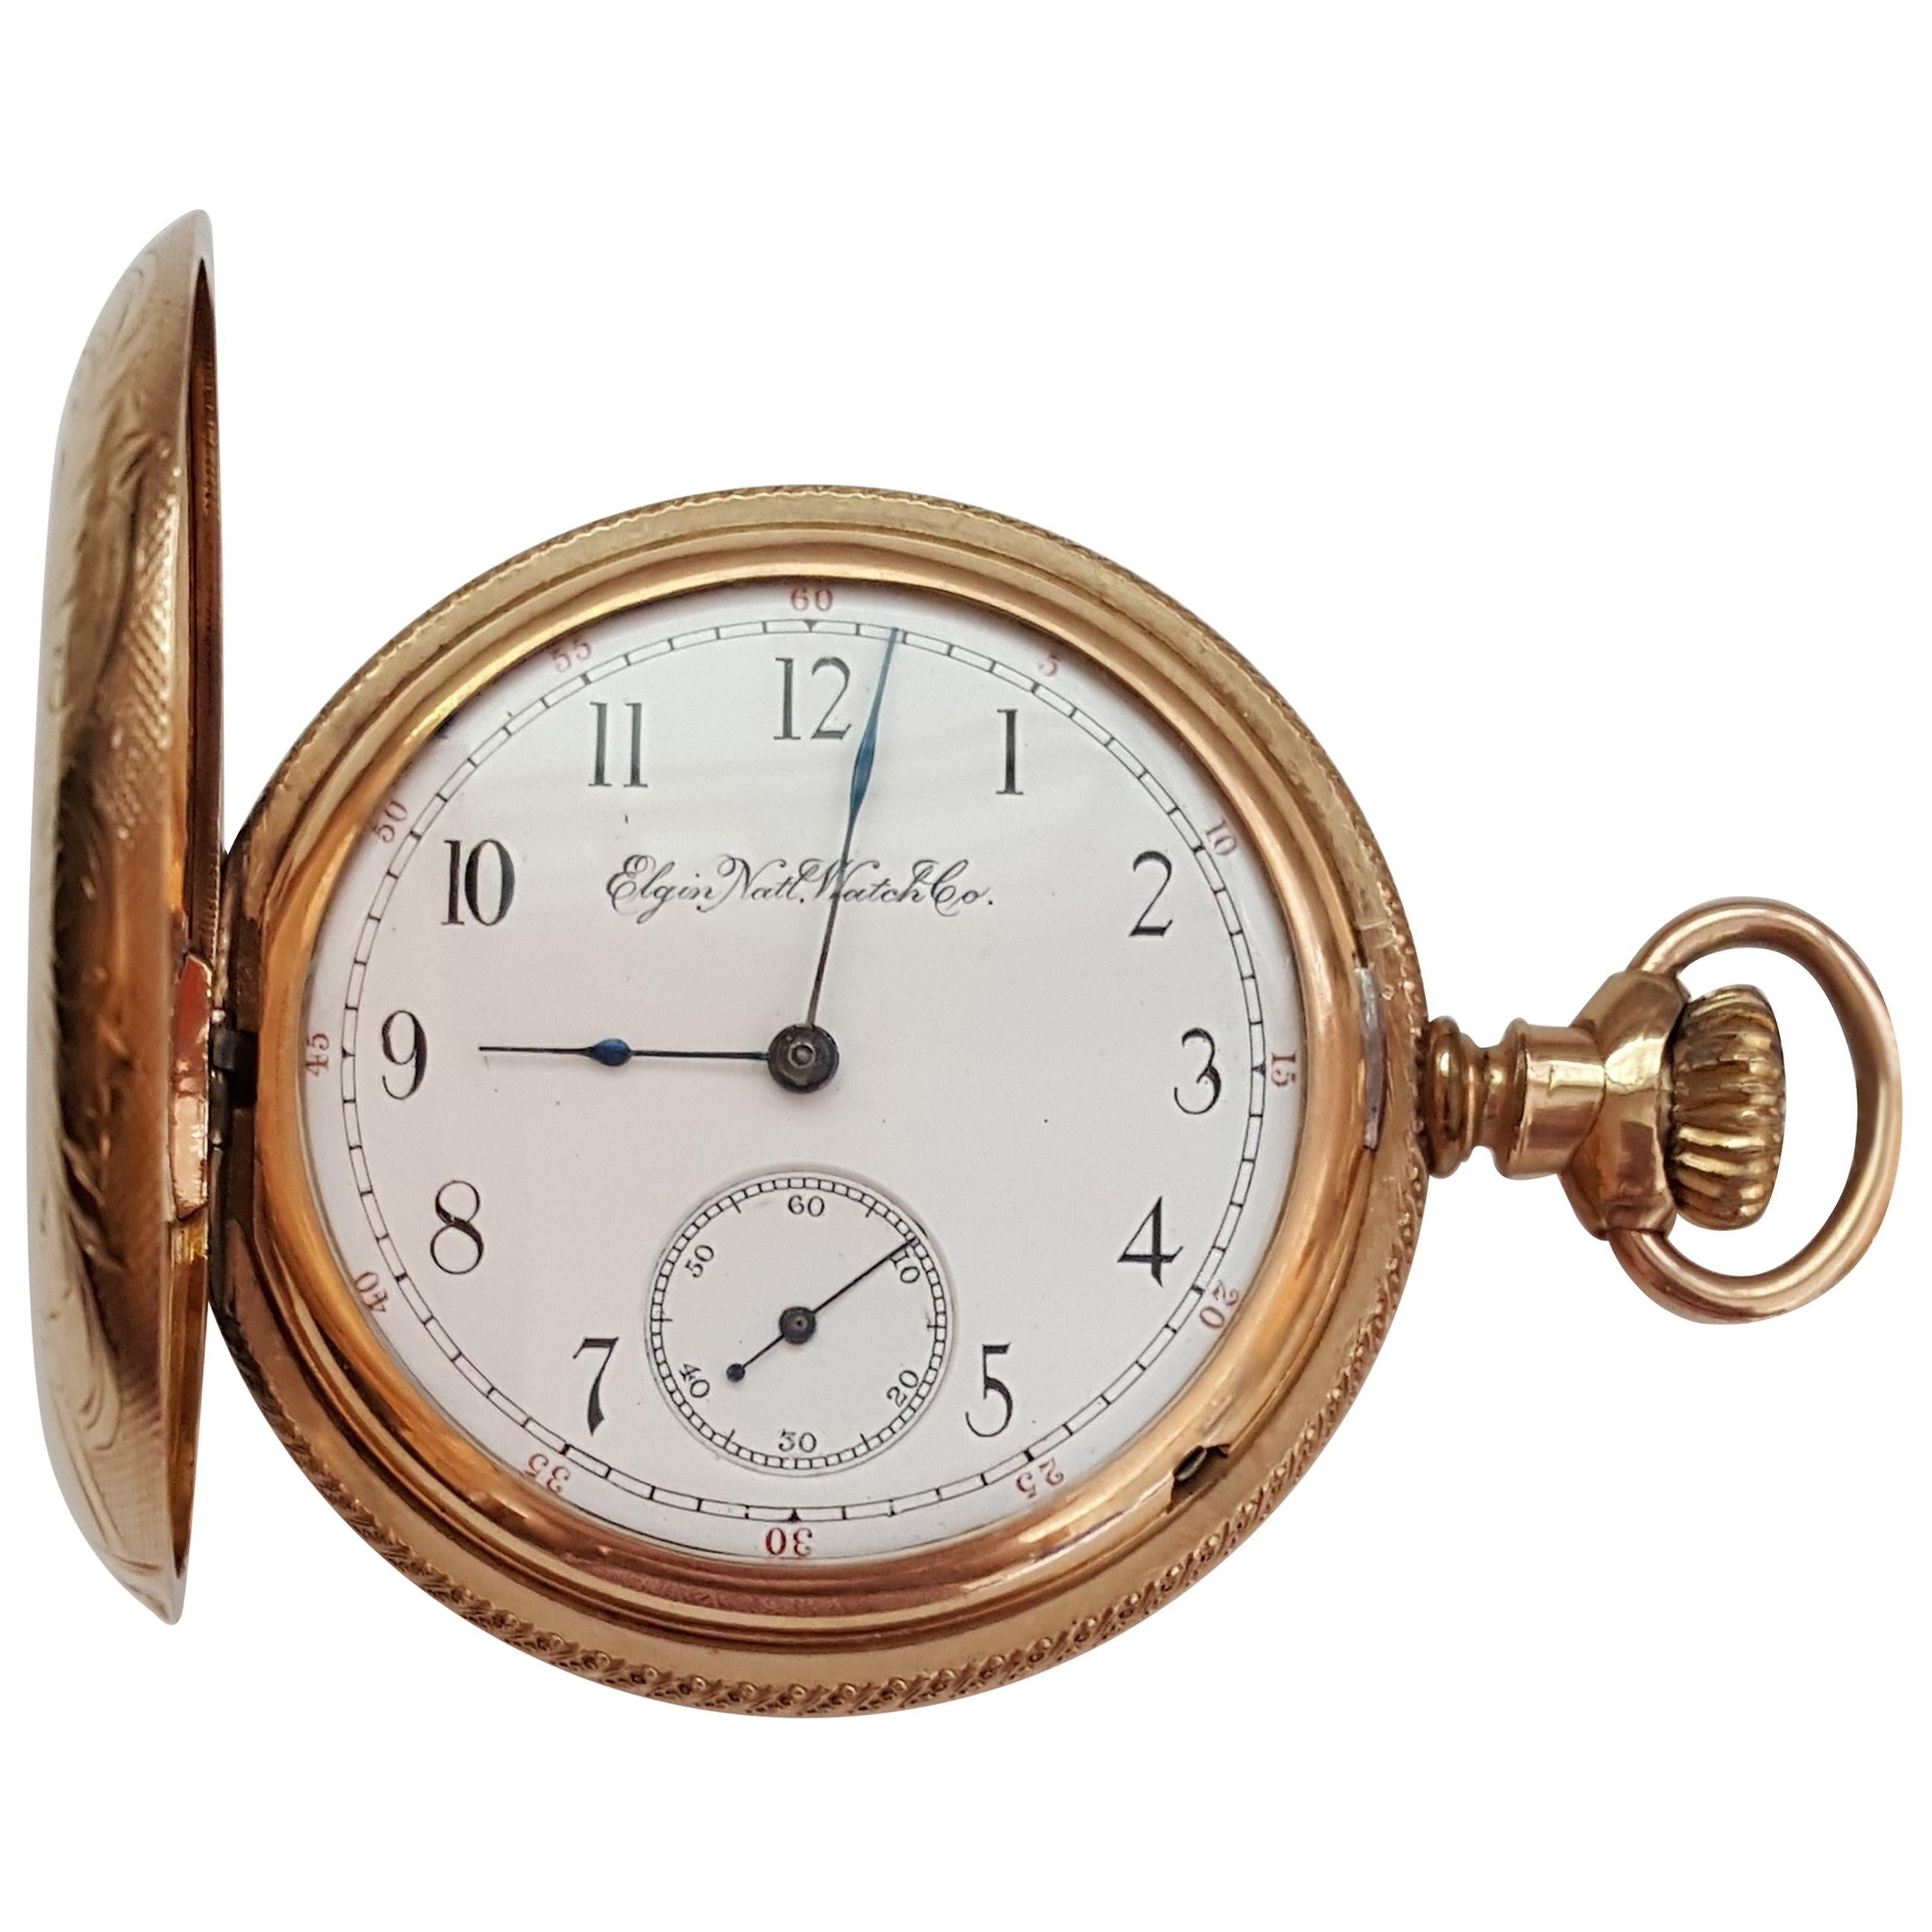 Vintage Elgin Pocket Watch, Yellow Gold-Plated, Case, Year 1893, 7 Jewel